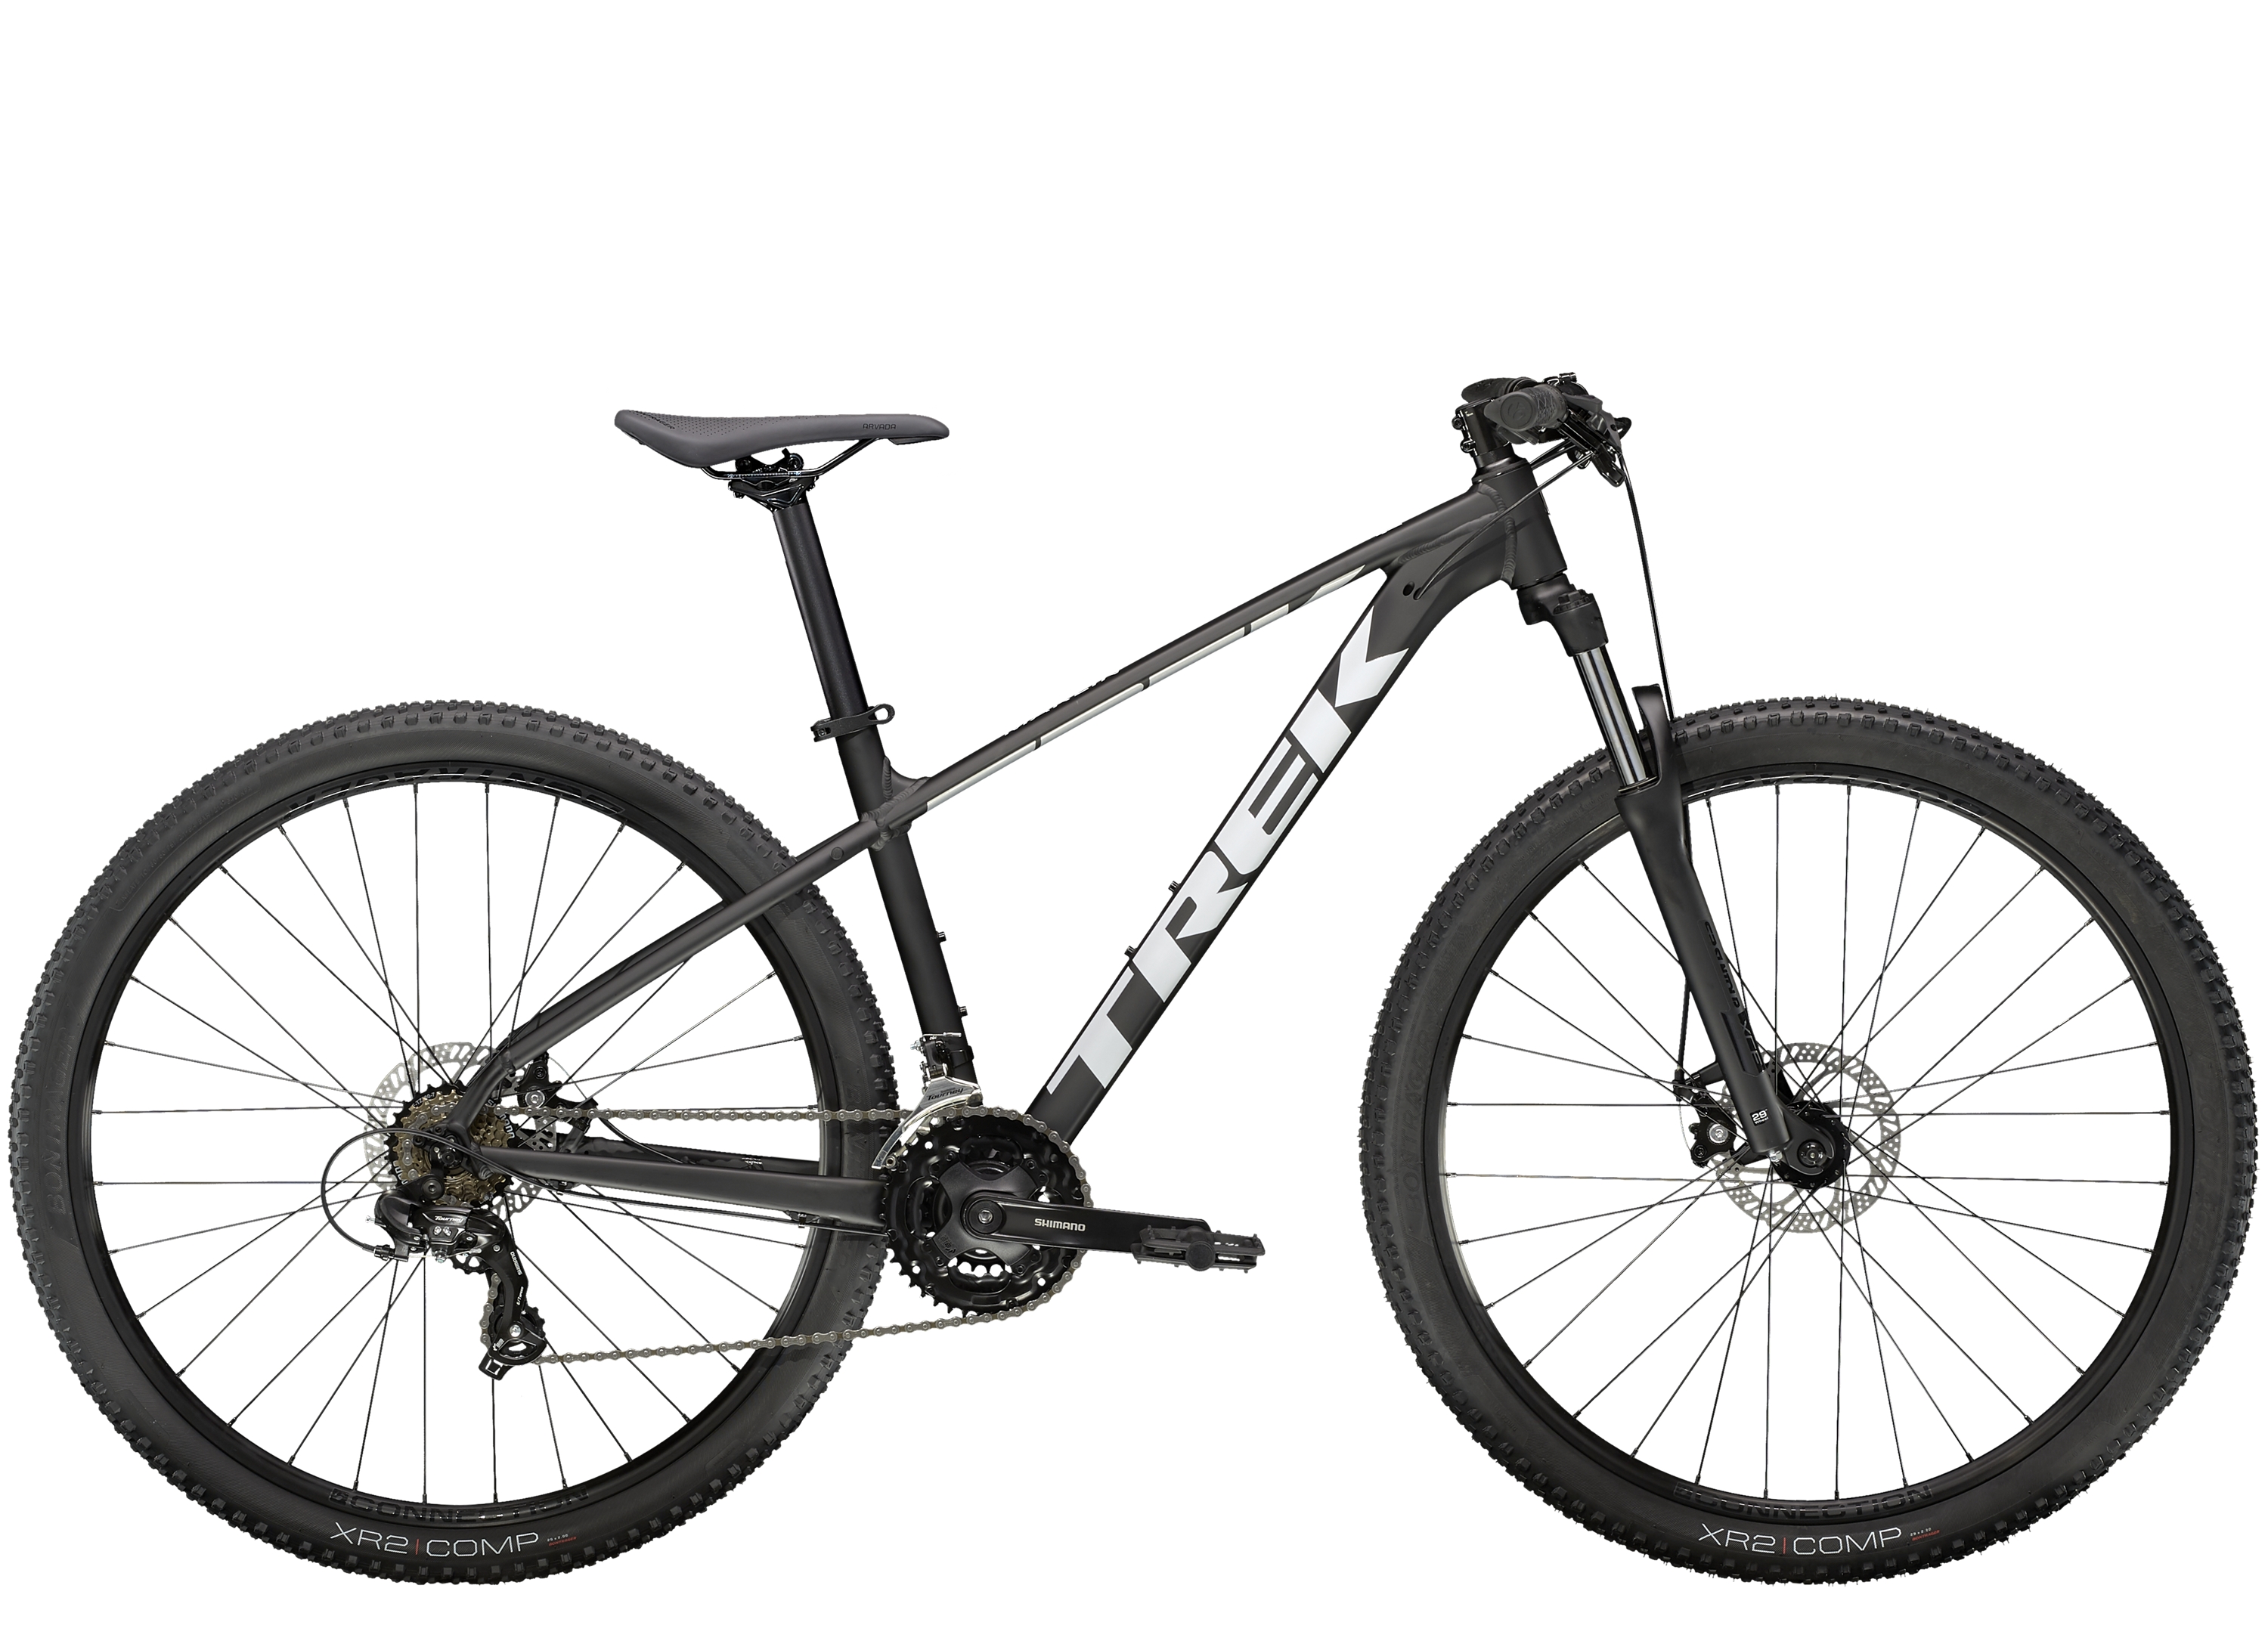 <a href="https://cycles-clement.be/product/marlin-4-s-27-5-matte-trek-black/">MARLIN 4 S 27.5 MATTE TREK BLACK</a>